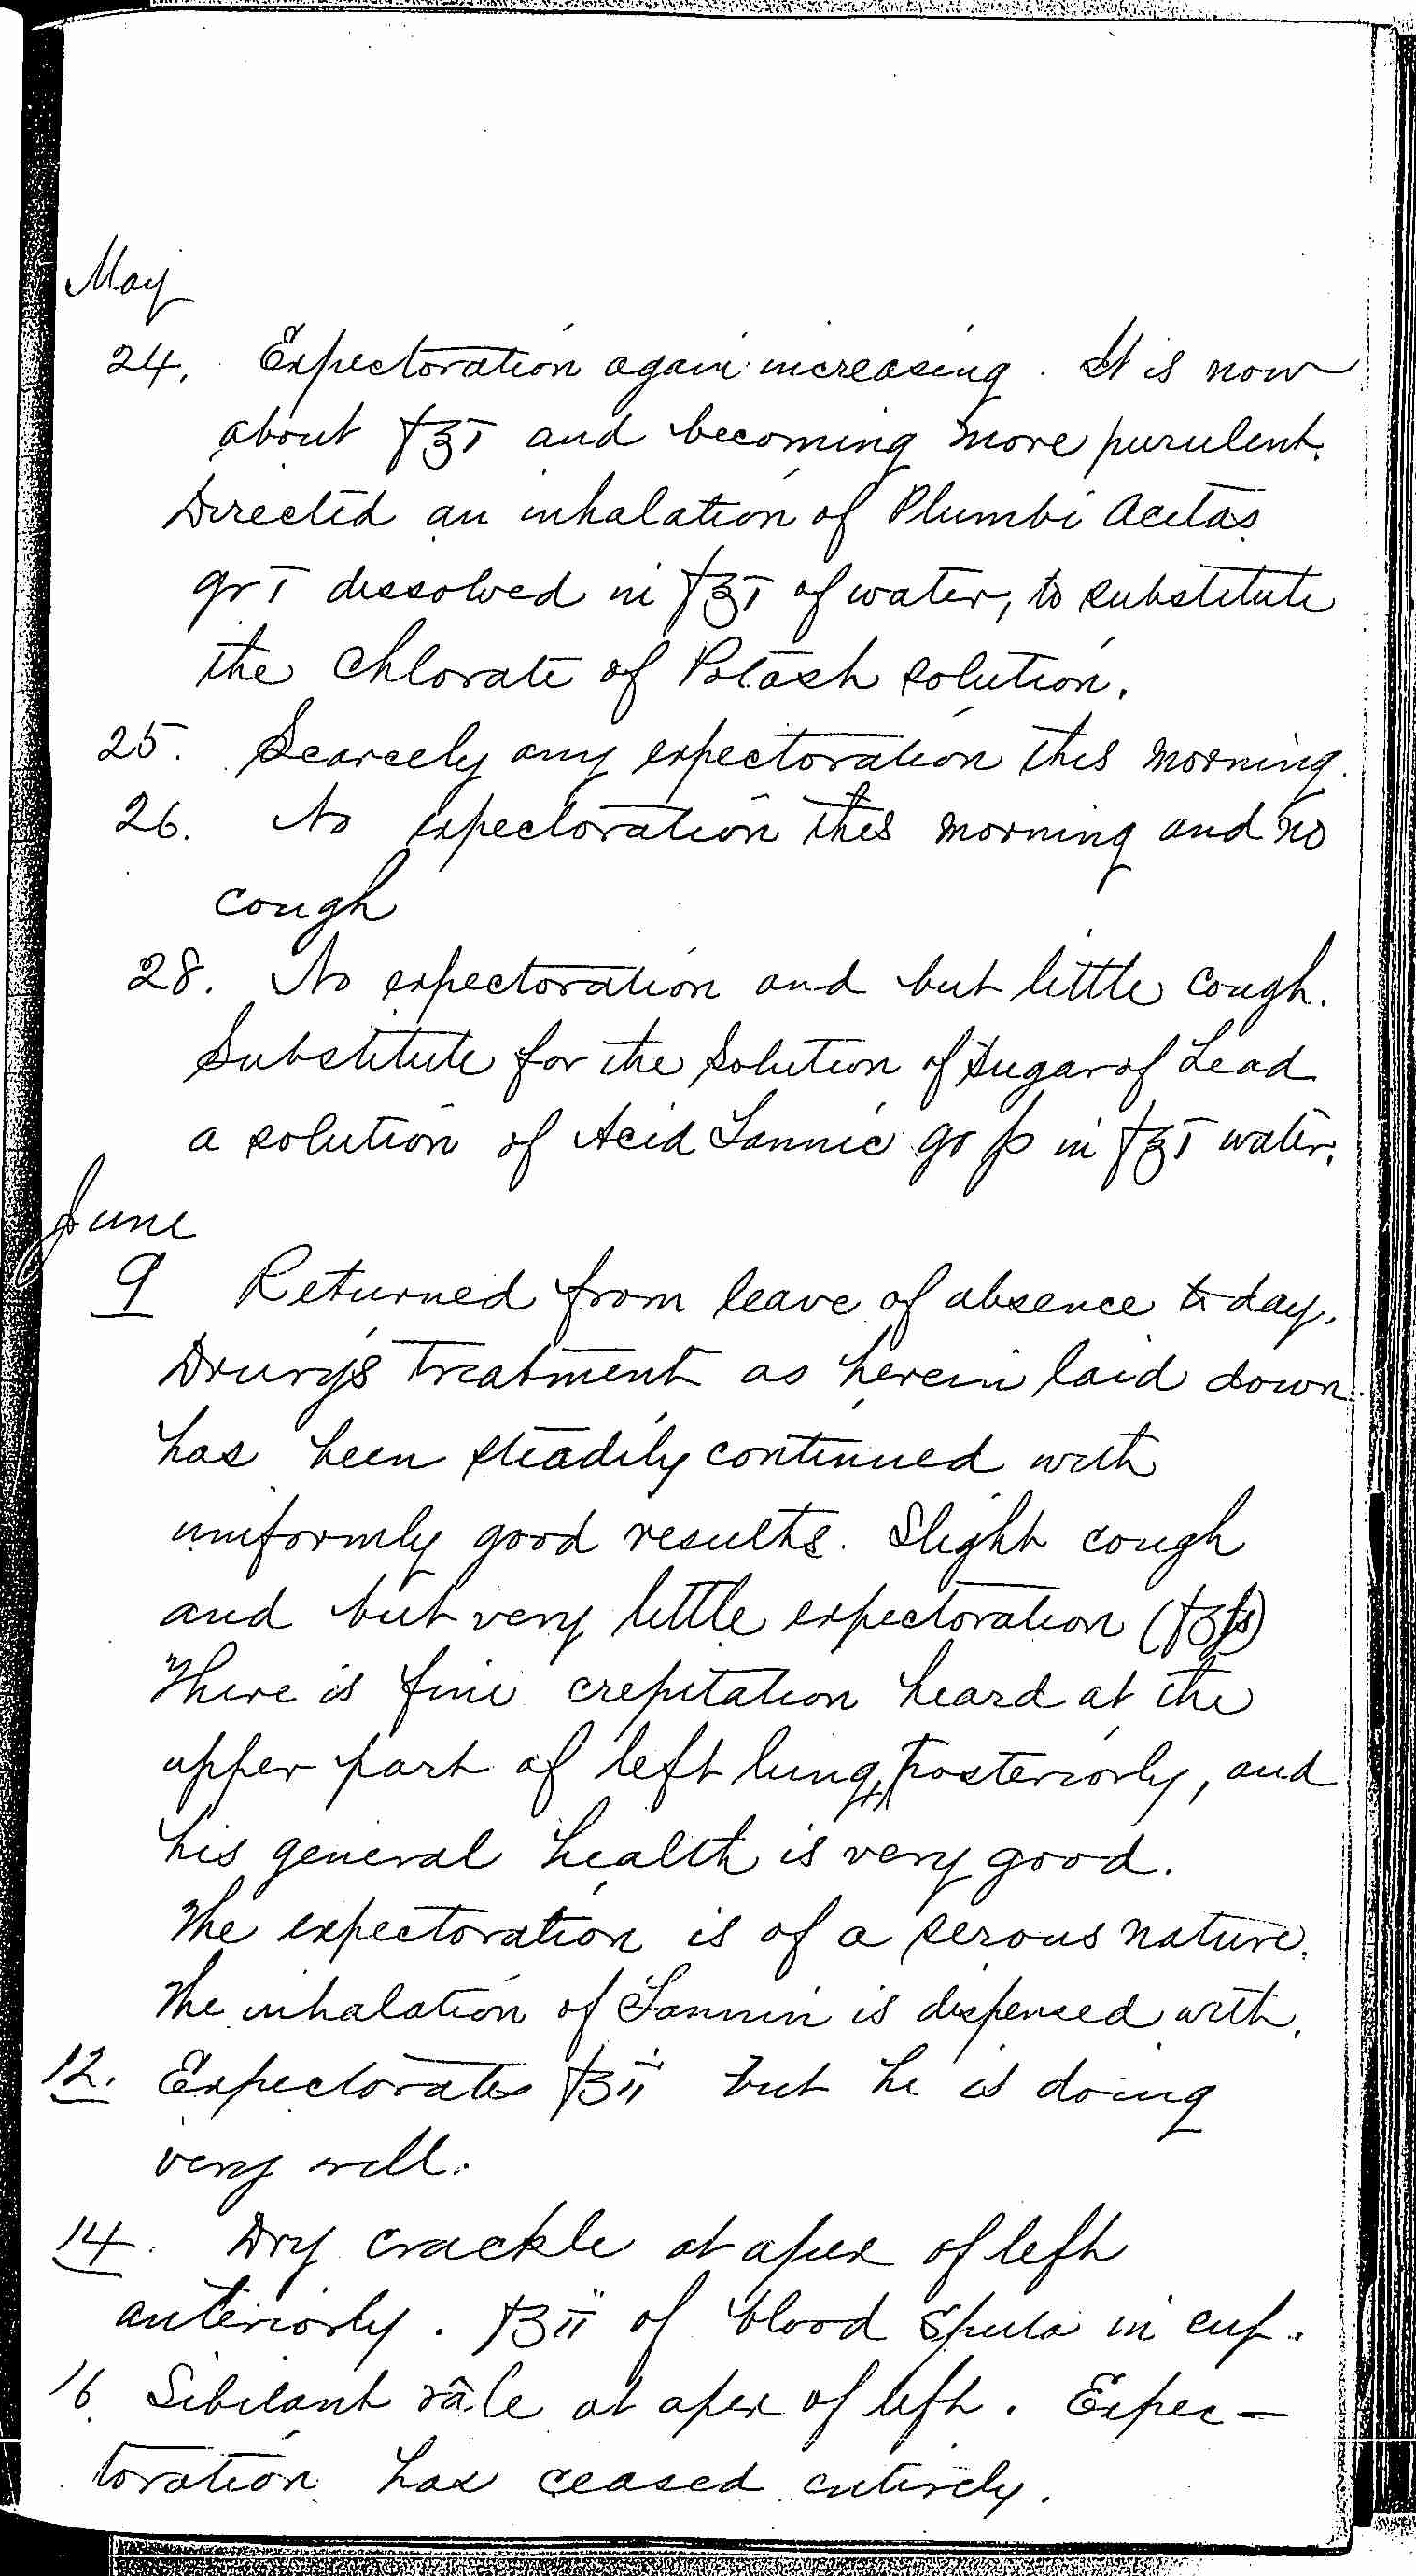 Entry for Bernard Drury (page 29 of 31) in the log Hospital Tickets and Case Papers - Naval Hospital - Washington, D.C. - 1868-69